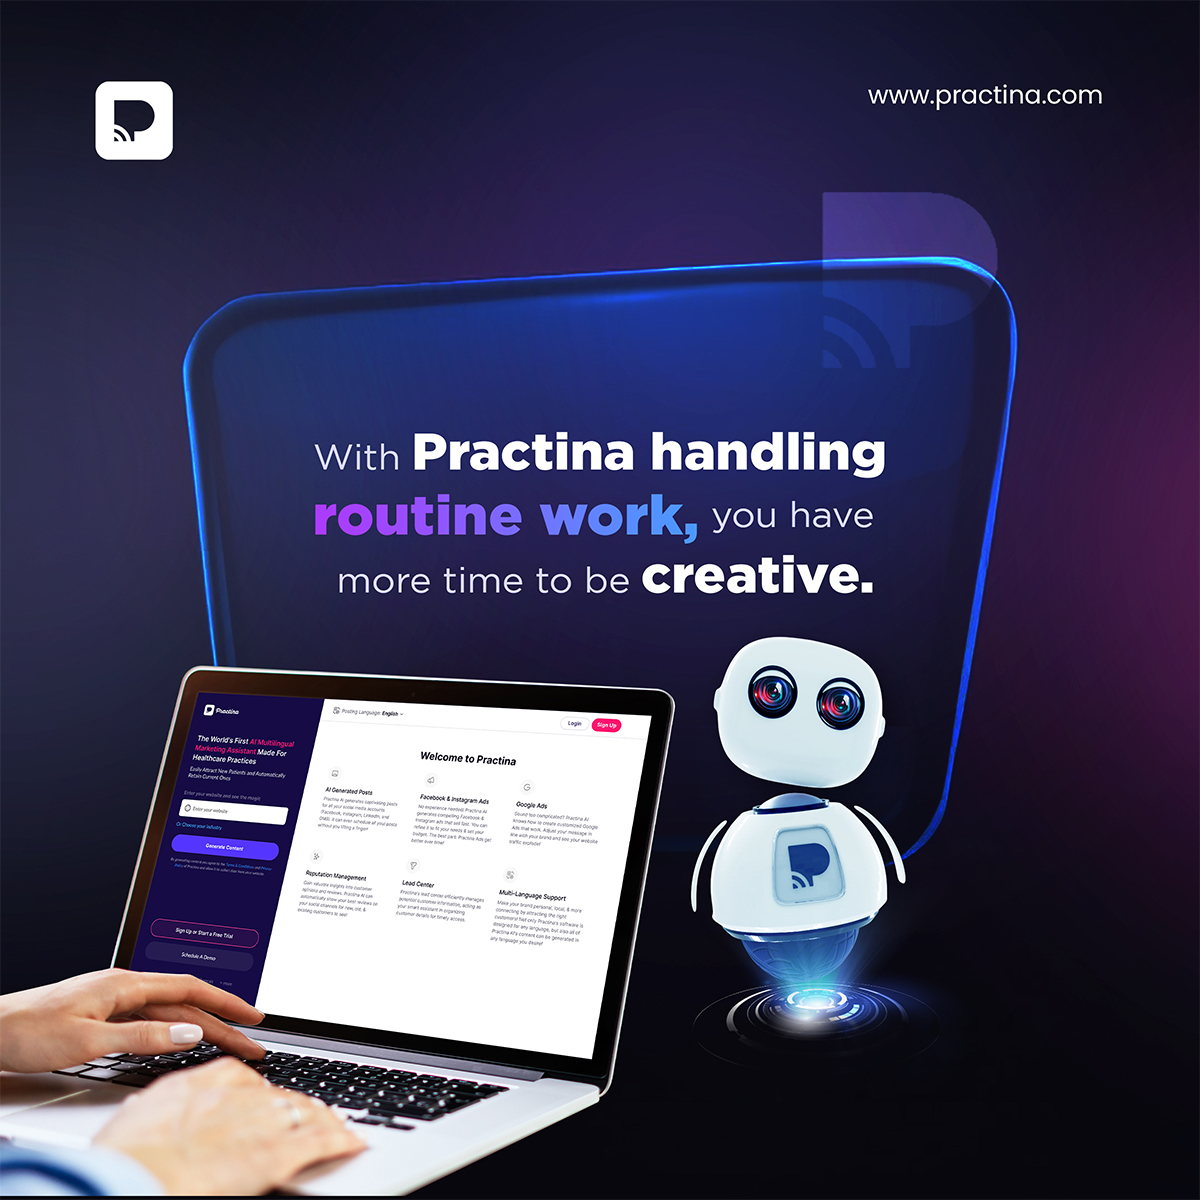 One out-of-the-box campaign can change the face of your brand. And with Practina taking care of your routine tasks, your team and you have the time to think of one! So, get a FREE trial today and free your mind and time for bigger things!

#PractinaAI